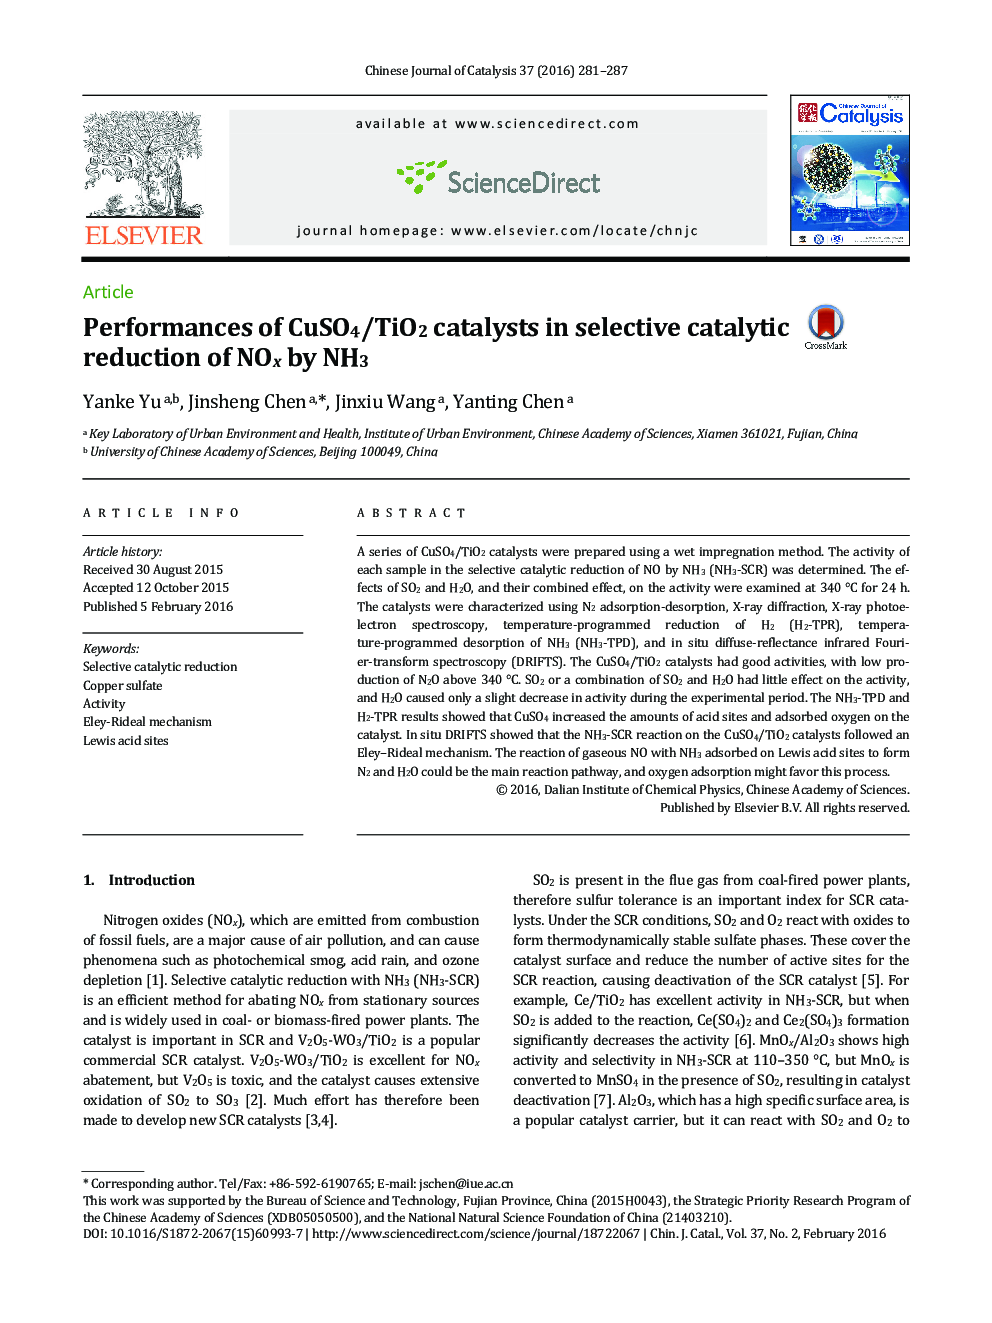 Performances of CuSO4/TiO2 catalysts in selective catalytic reduction of NOx by NH3